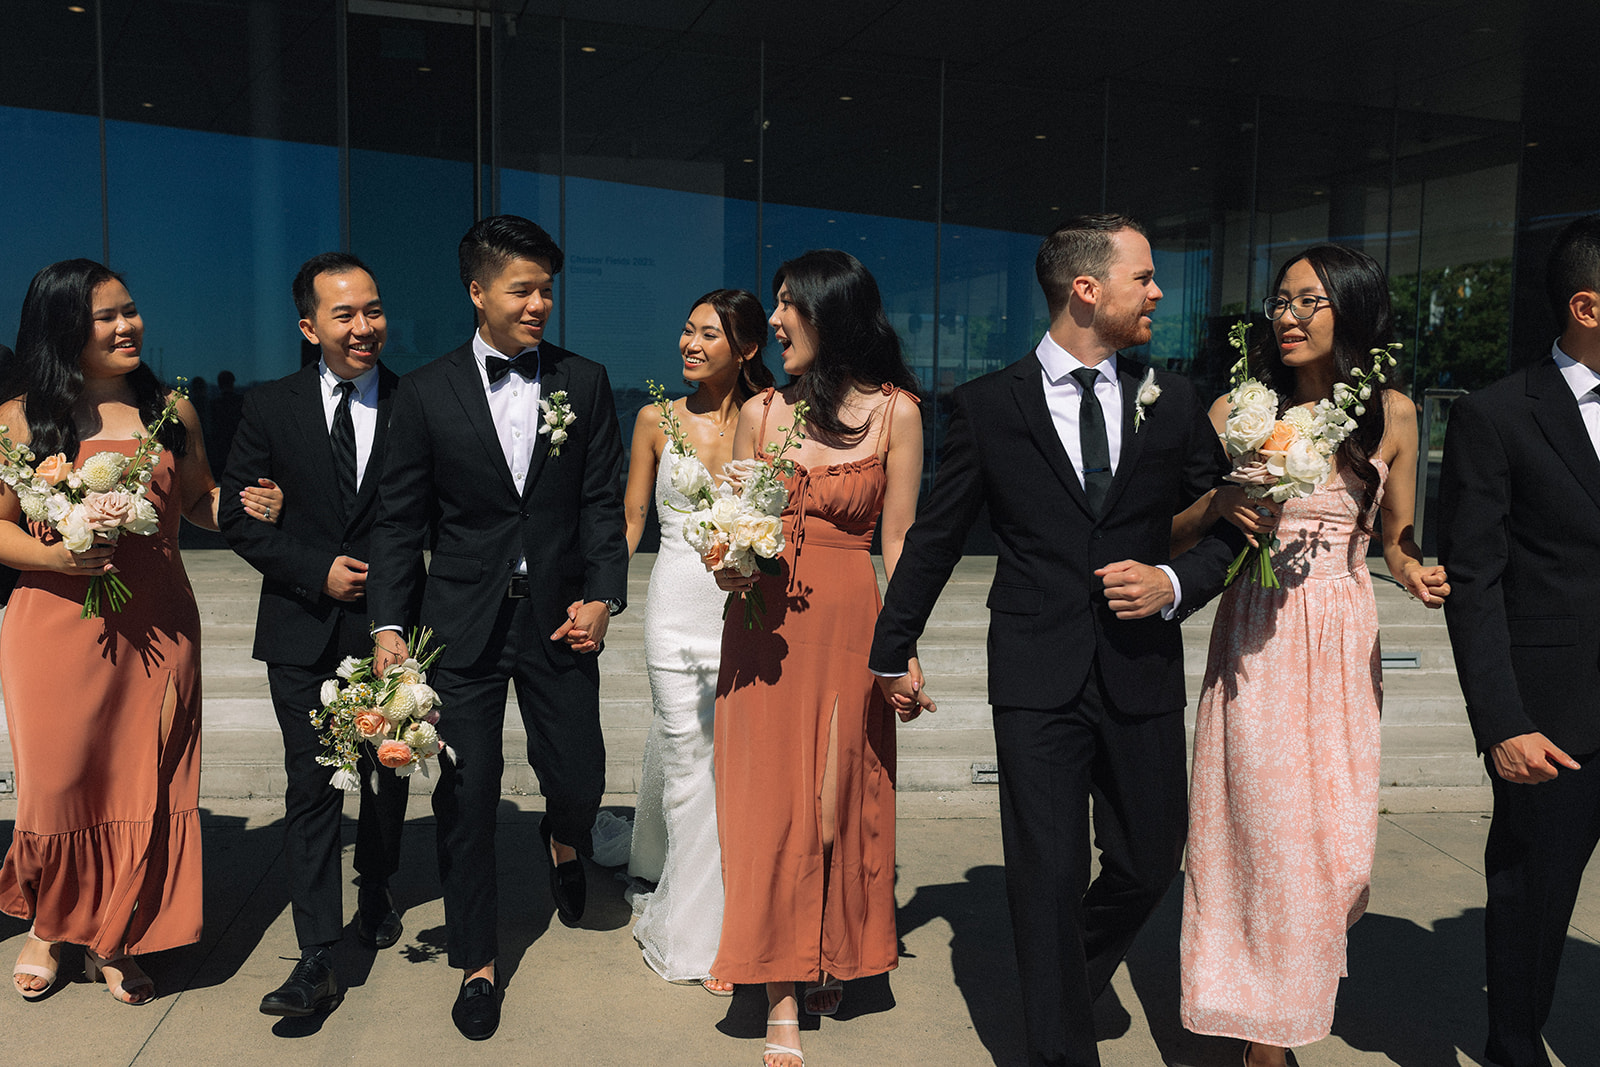 the shipyards in north vancouver danika camba photography, vancouver and kelowna wedding photographer